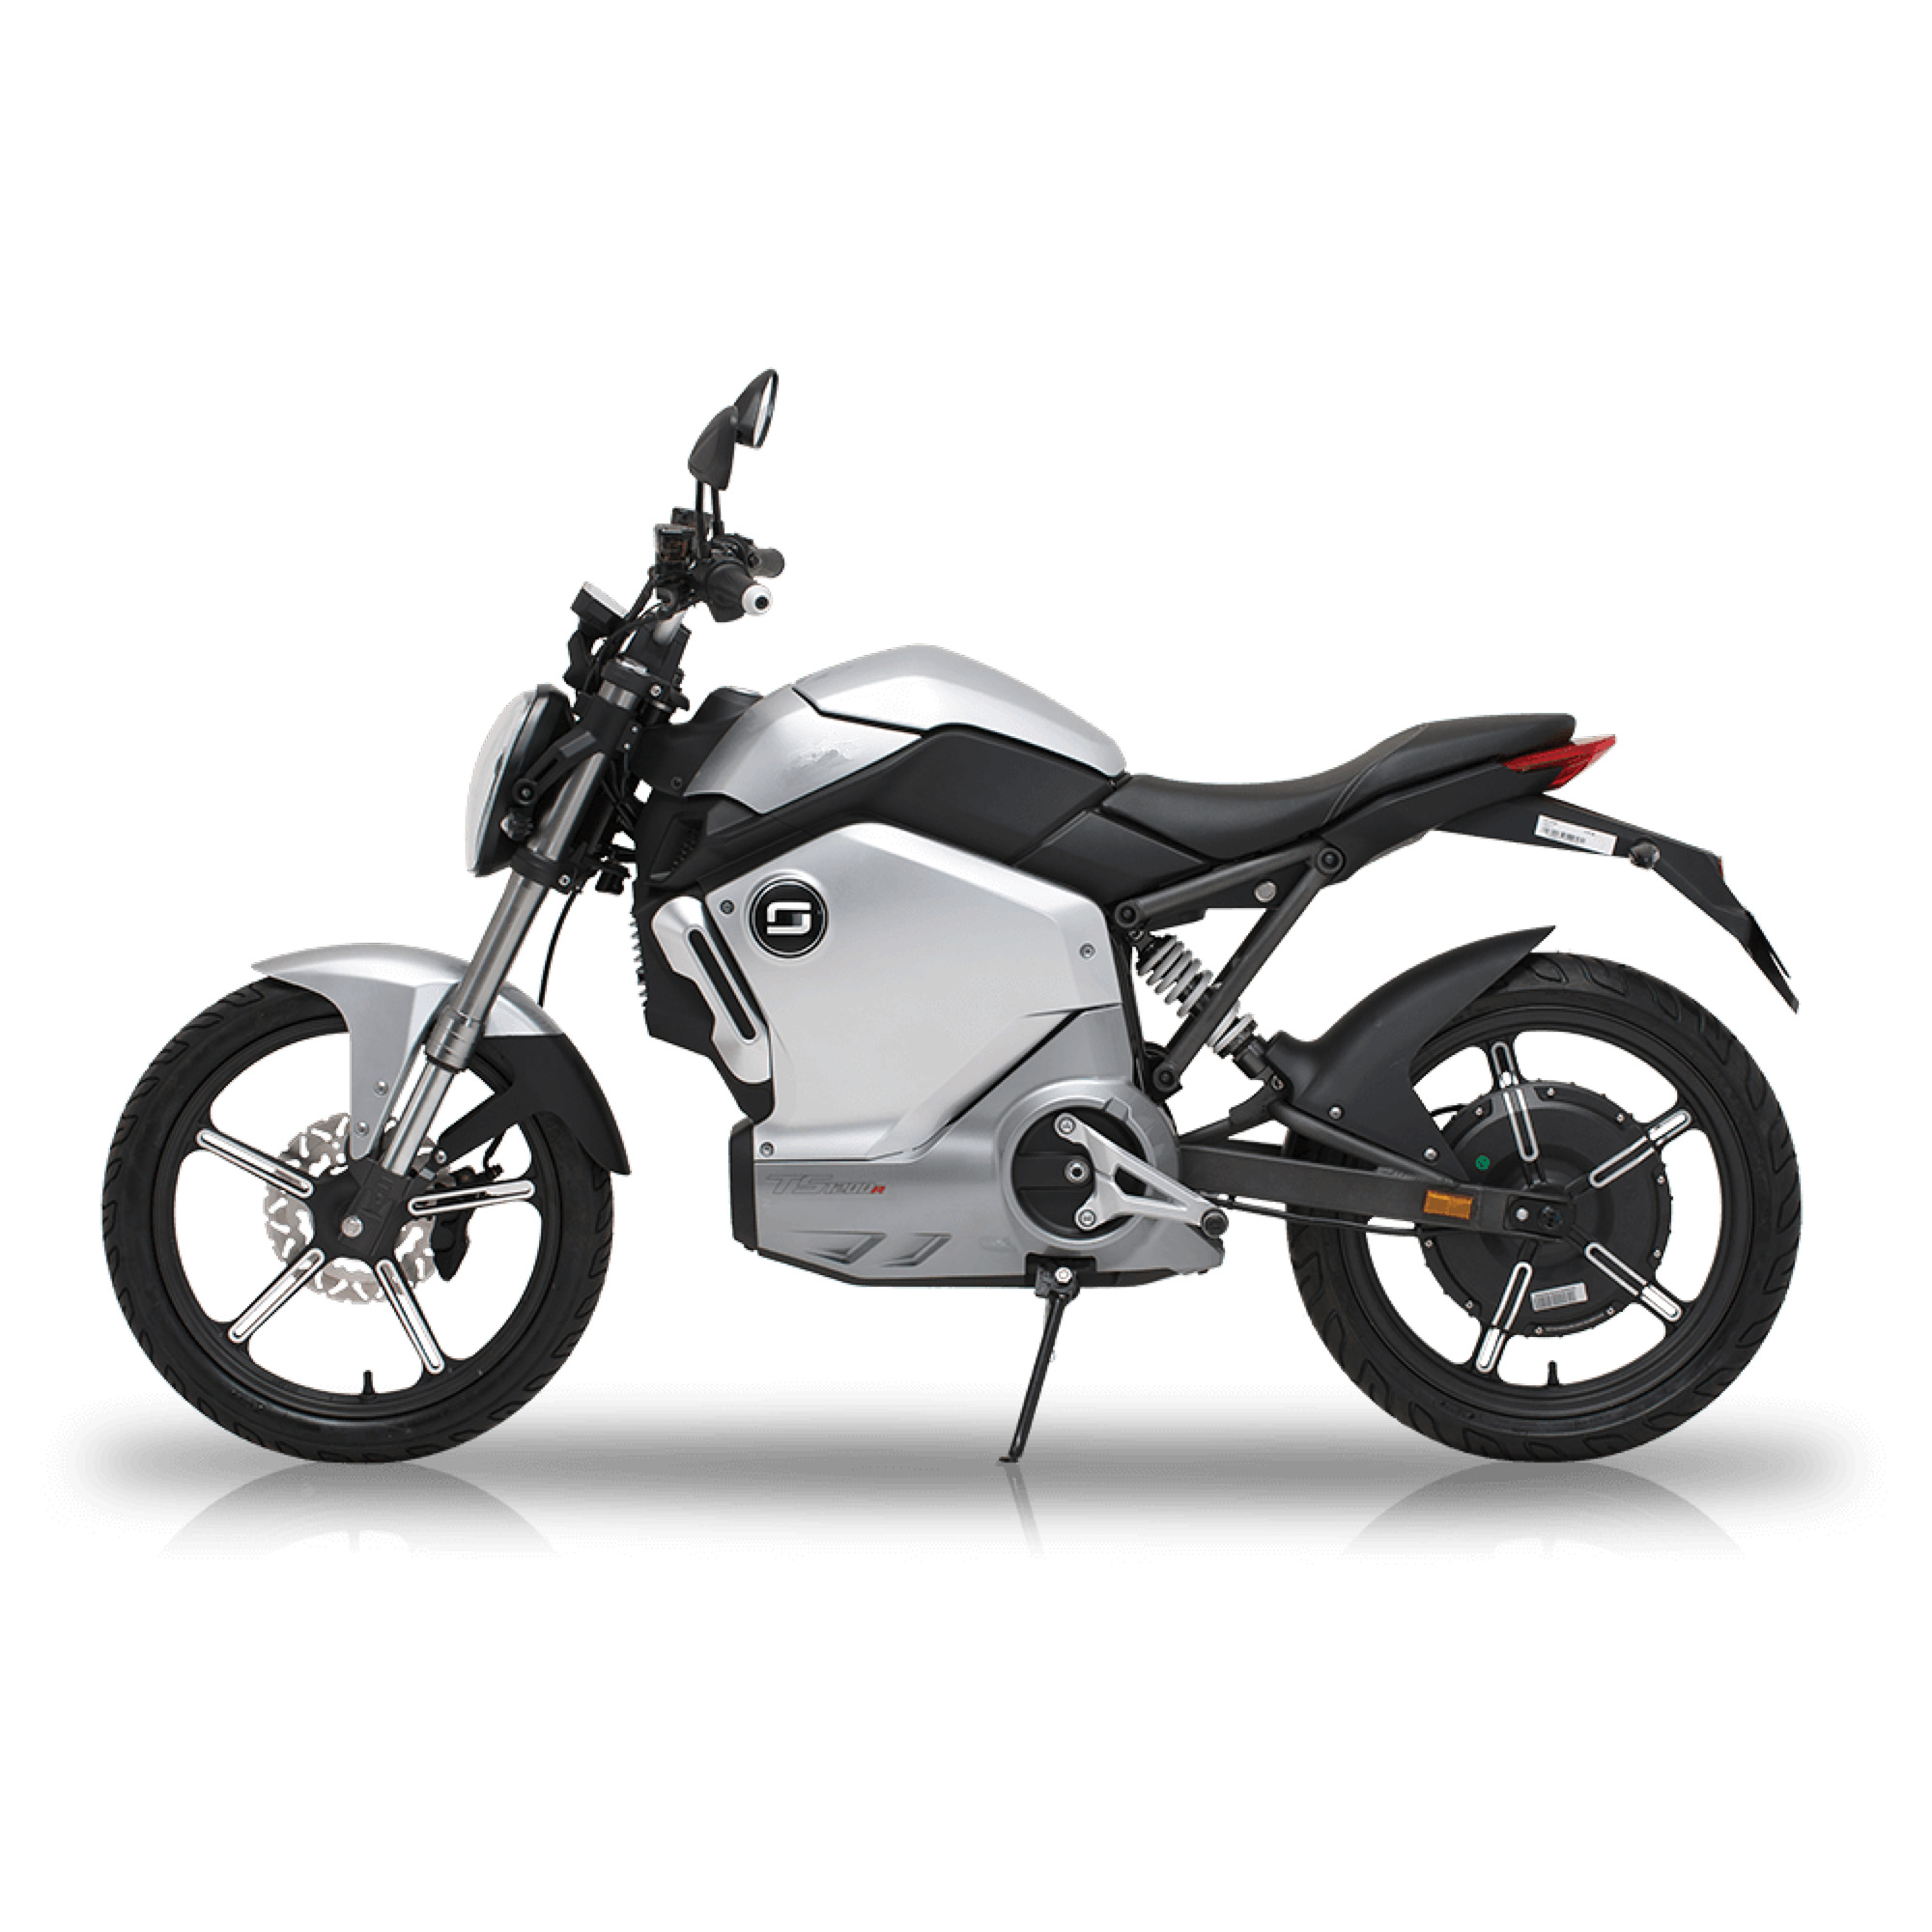 NOITAVONNE E CONCORDE - Sleek, Performance Packed, And Eco-friendly, The Noitavonne E-bike Delivers On Every Level. Getting 55 Miles/charge And A Top Speed Of 35 Mph, The Need For Obtaining A Motorcycle Licence Is Not Required.